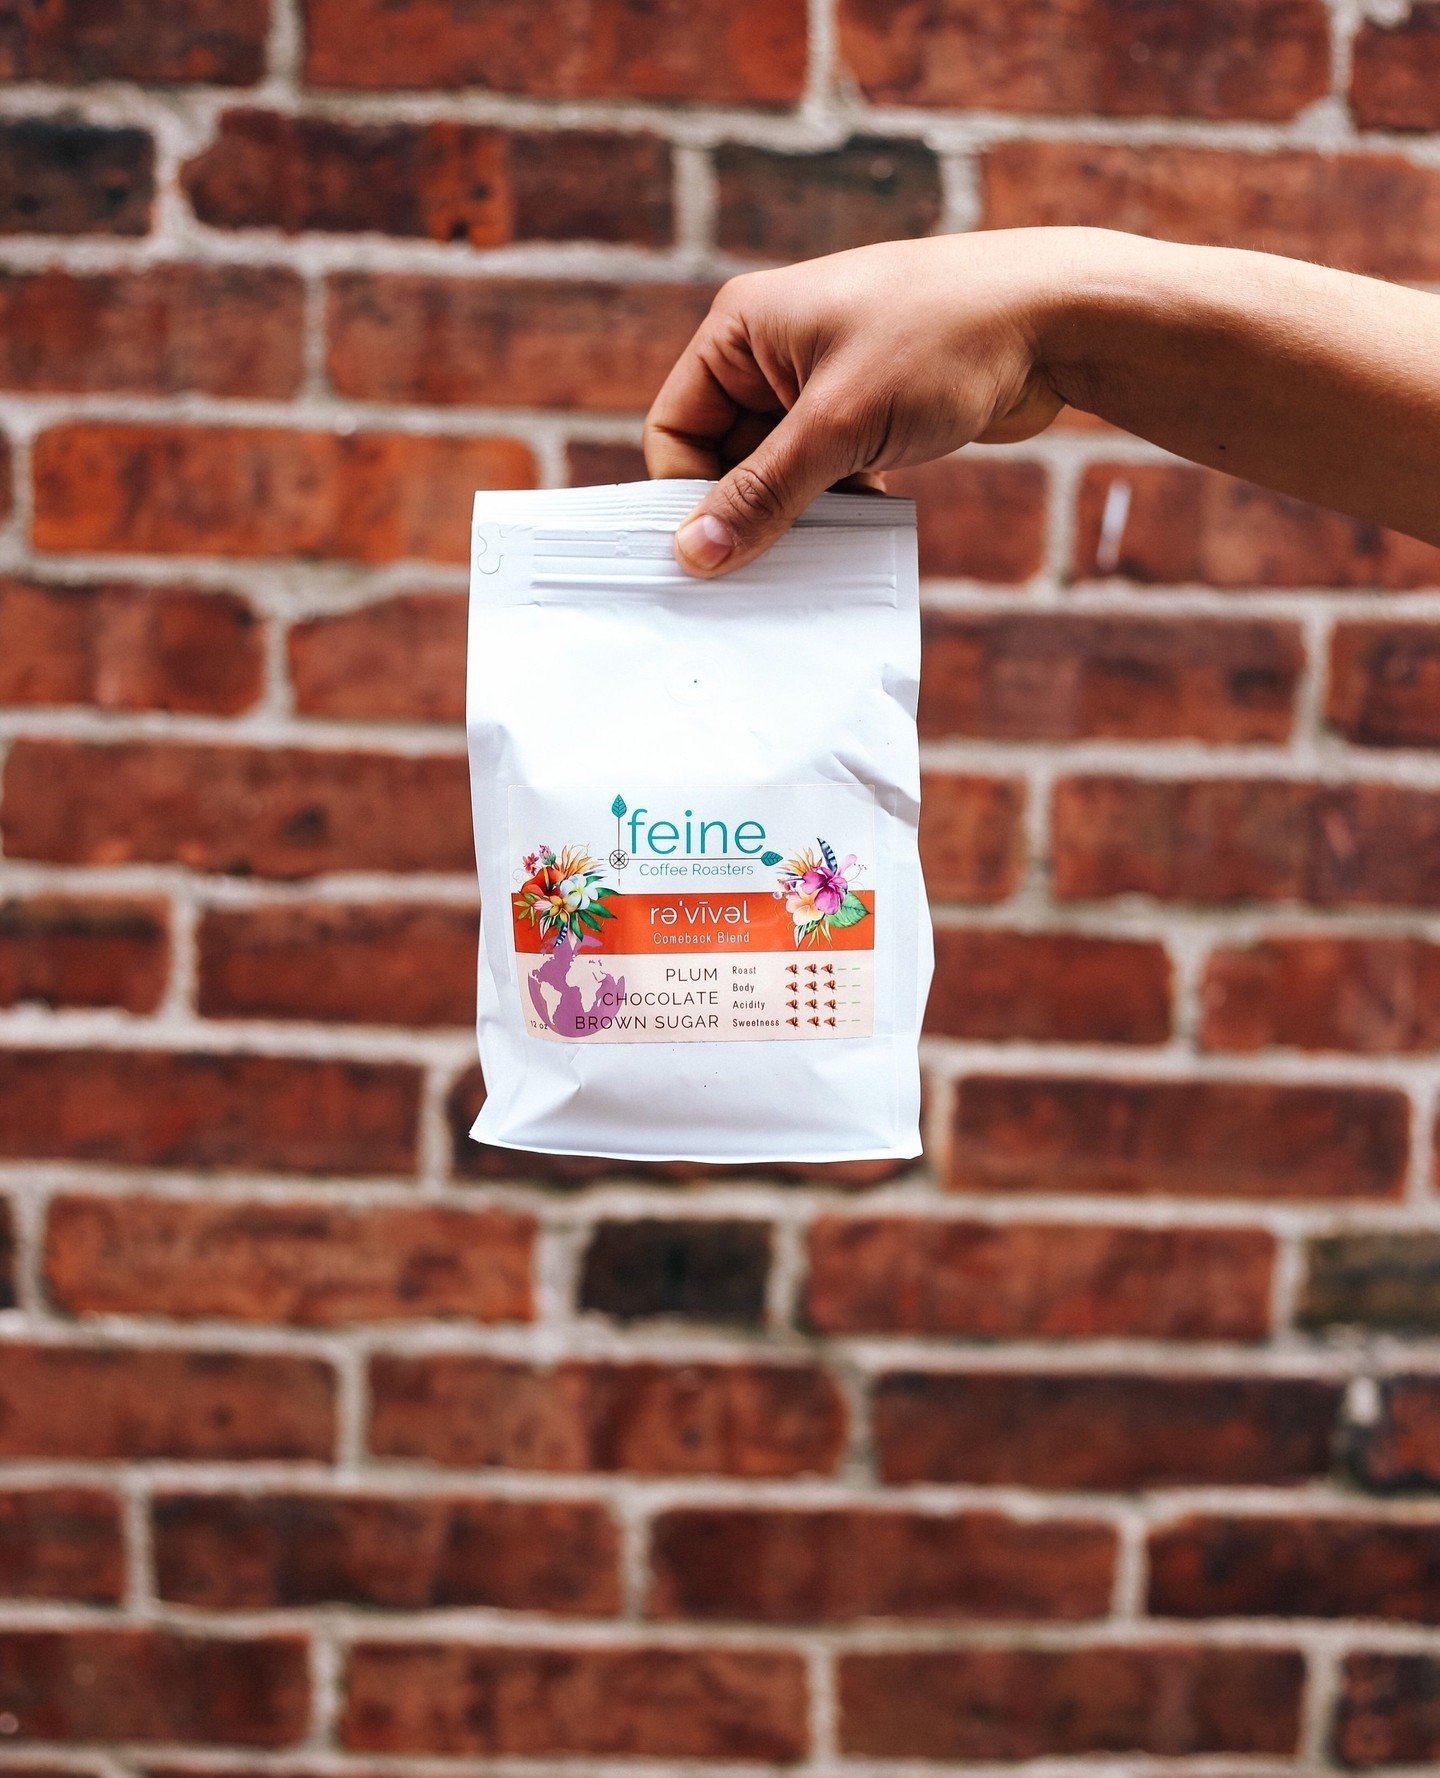 If you haven't already, check out our in-store retail shelf to take home any of our Feine roasts!! Revival combines notes of plum, chocolate, and brown sugar to start your morning off in the best way possible!⁠
⁠
#drinkfeine #coffeebeans #roastery #c